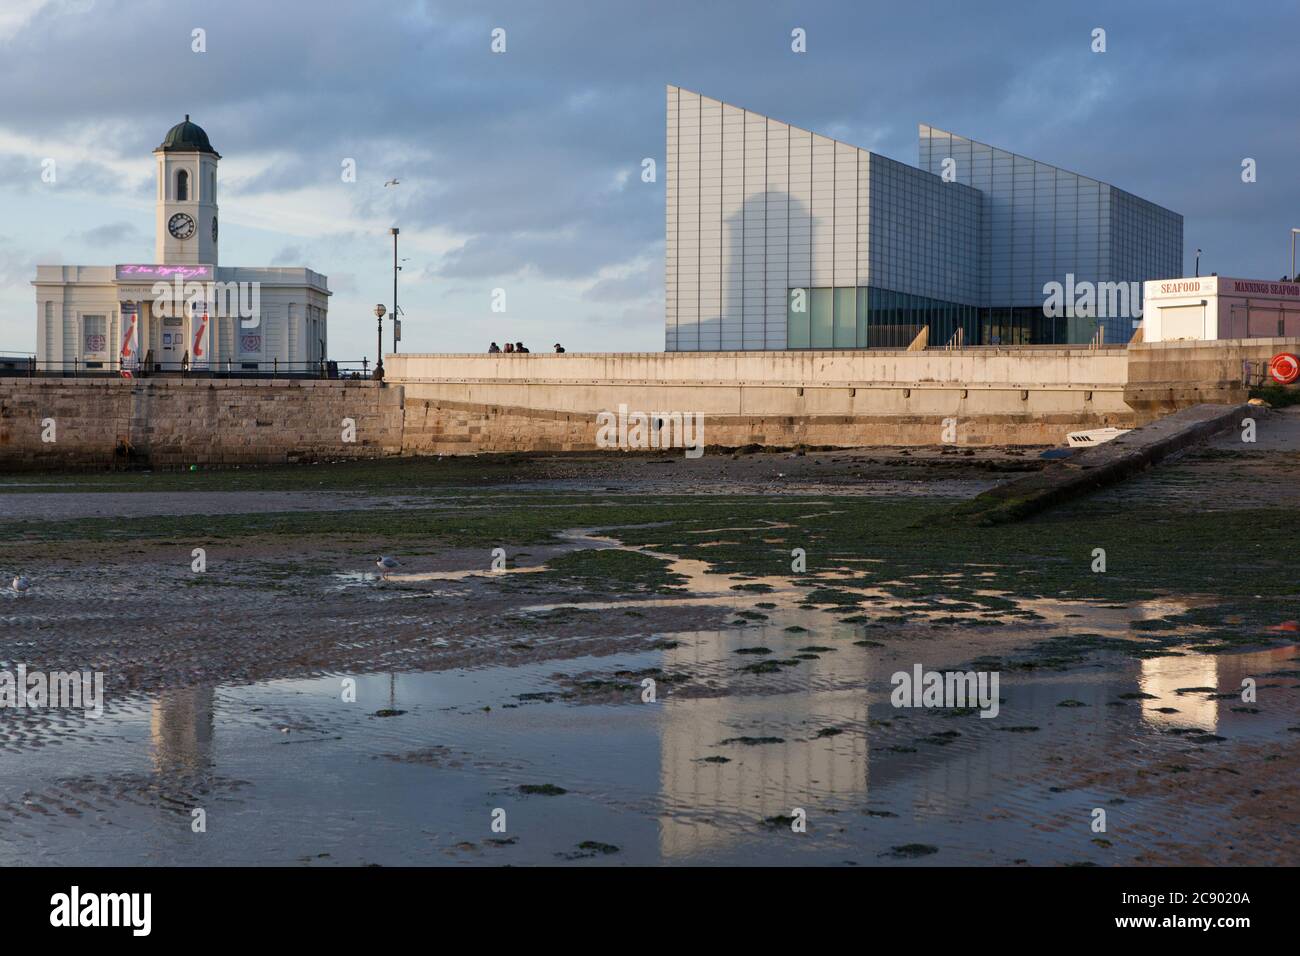 Margate, UK, 27 July 2020: With the risk of foreign holidays being affected by sudden changes to quarantine rules, and the weather set to improve in England, seaside towns such as Margate are increasing attractive to staycationers. Anna Watson/Alamy Live News Stock Photo